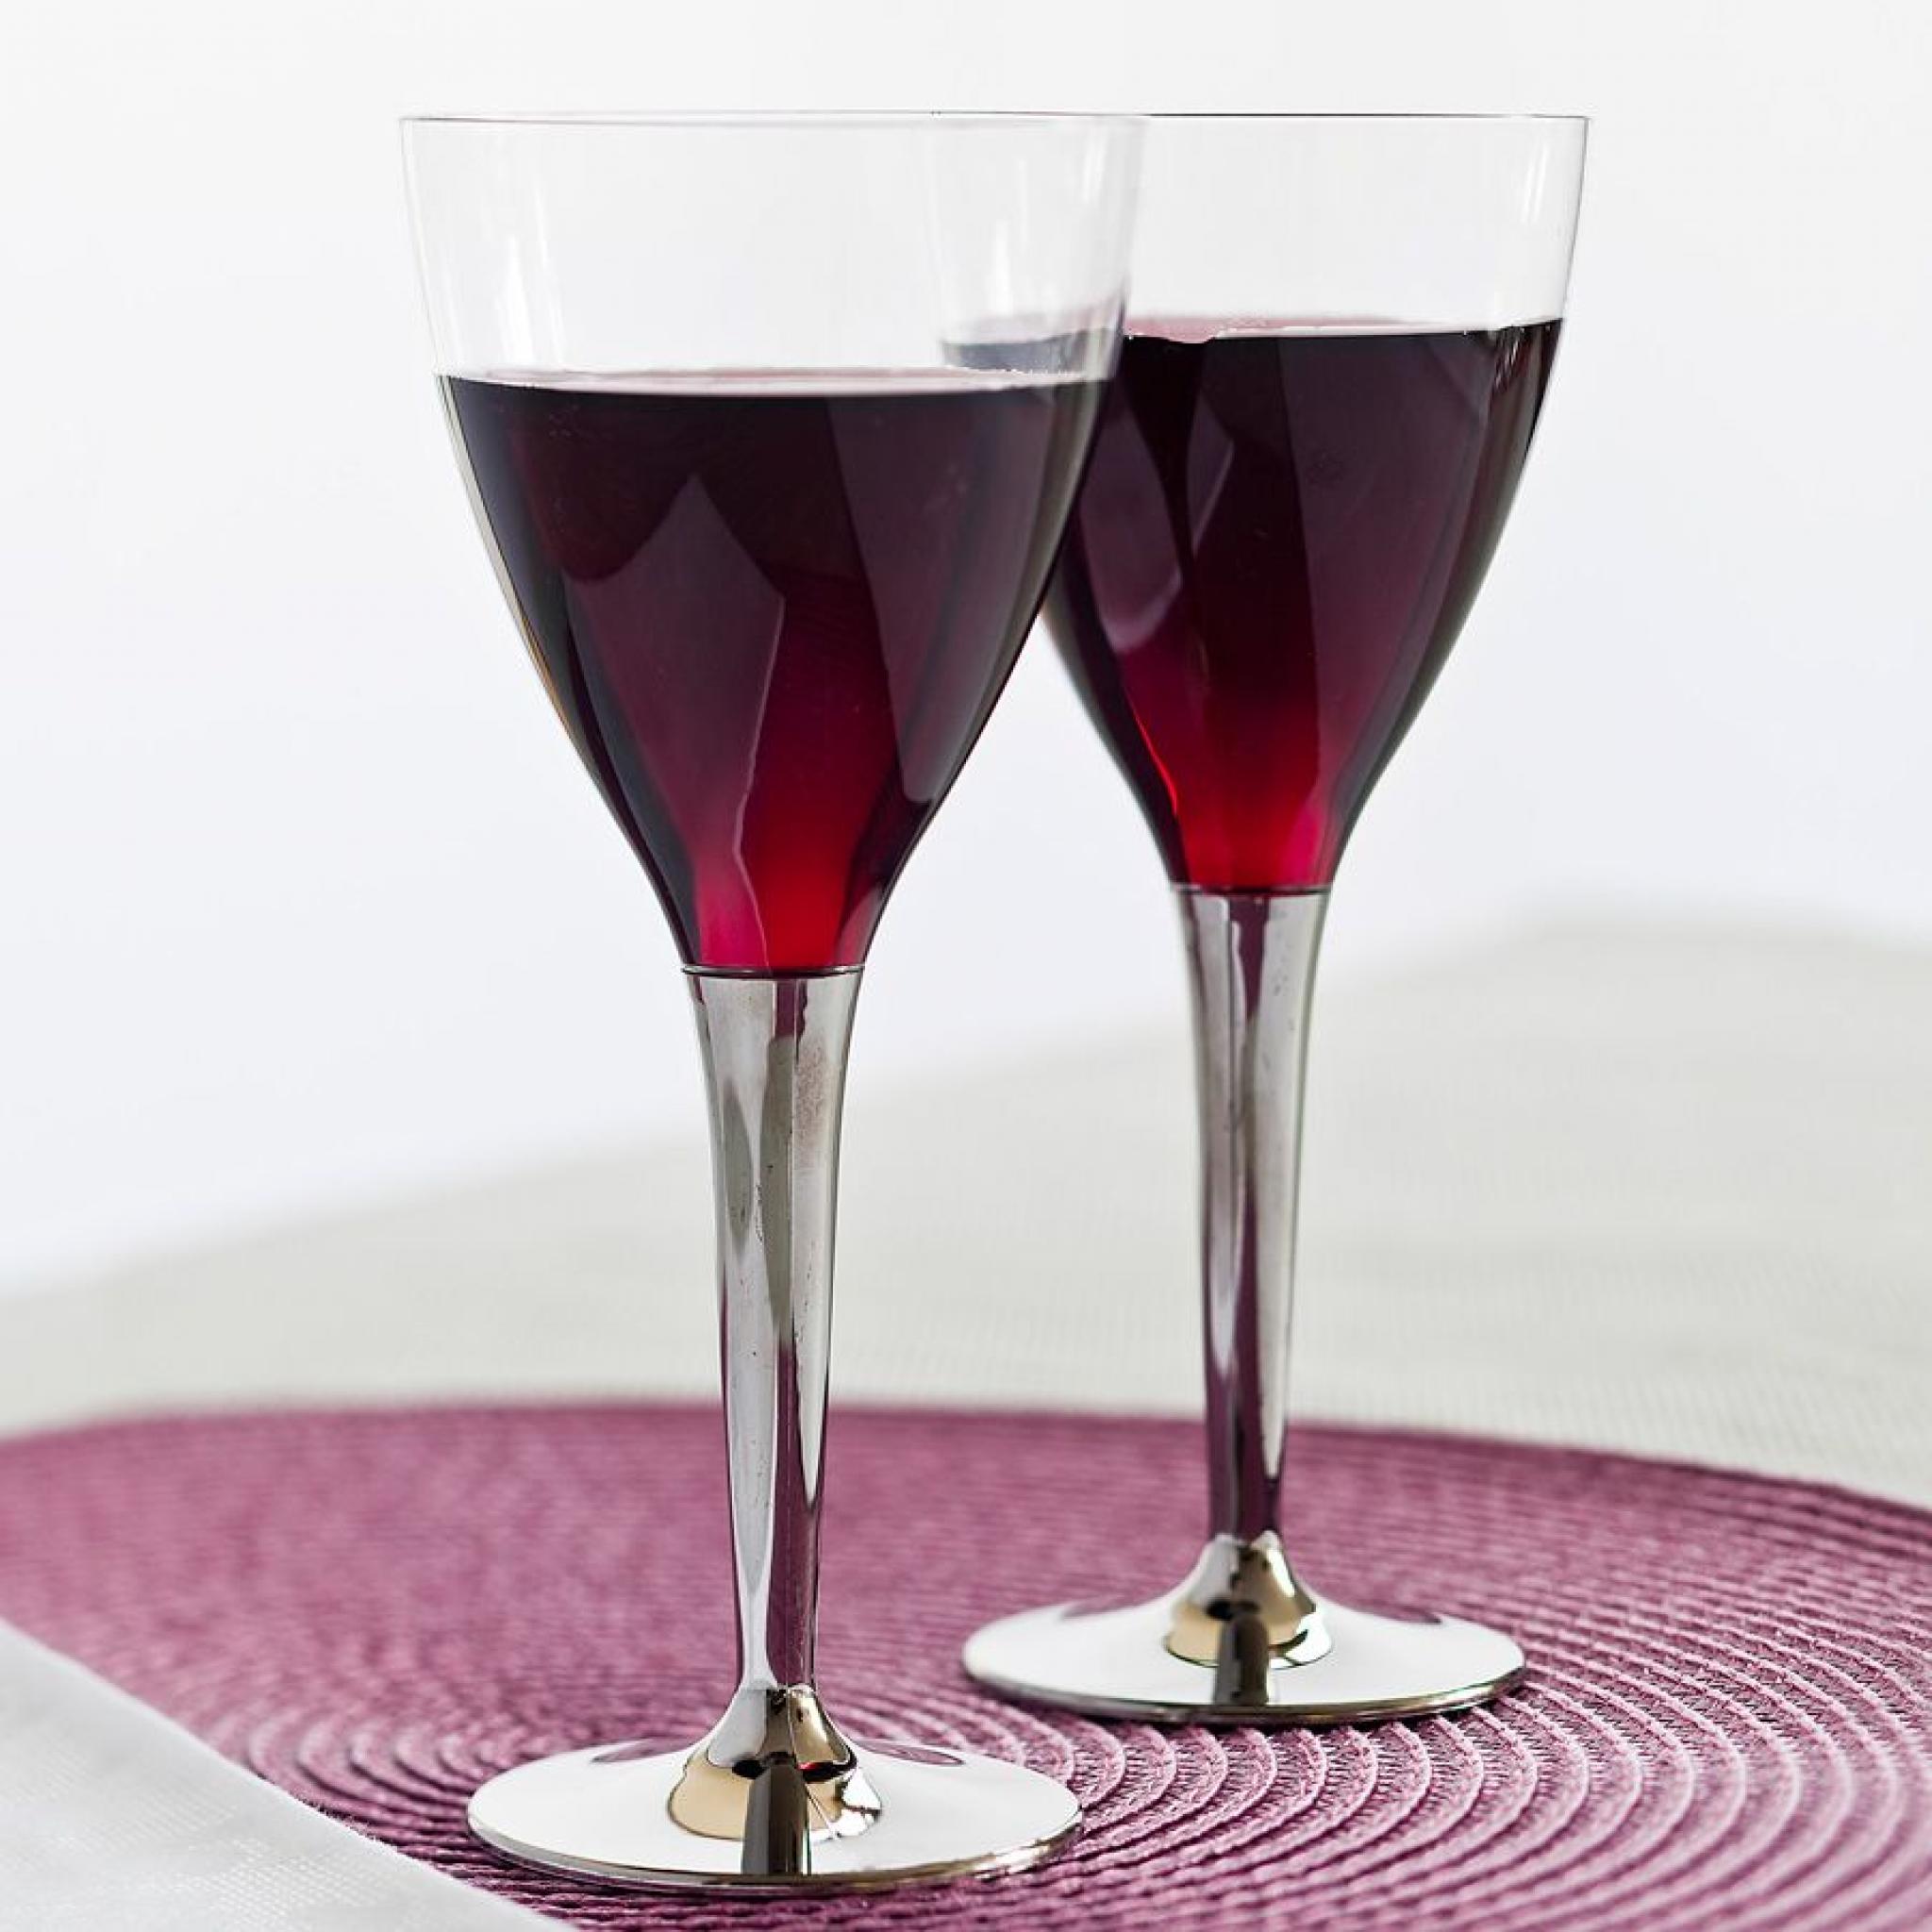 clear plastic wine cups